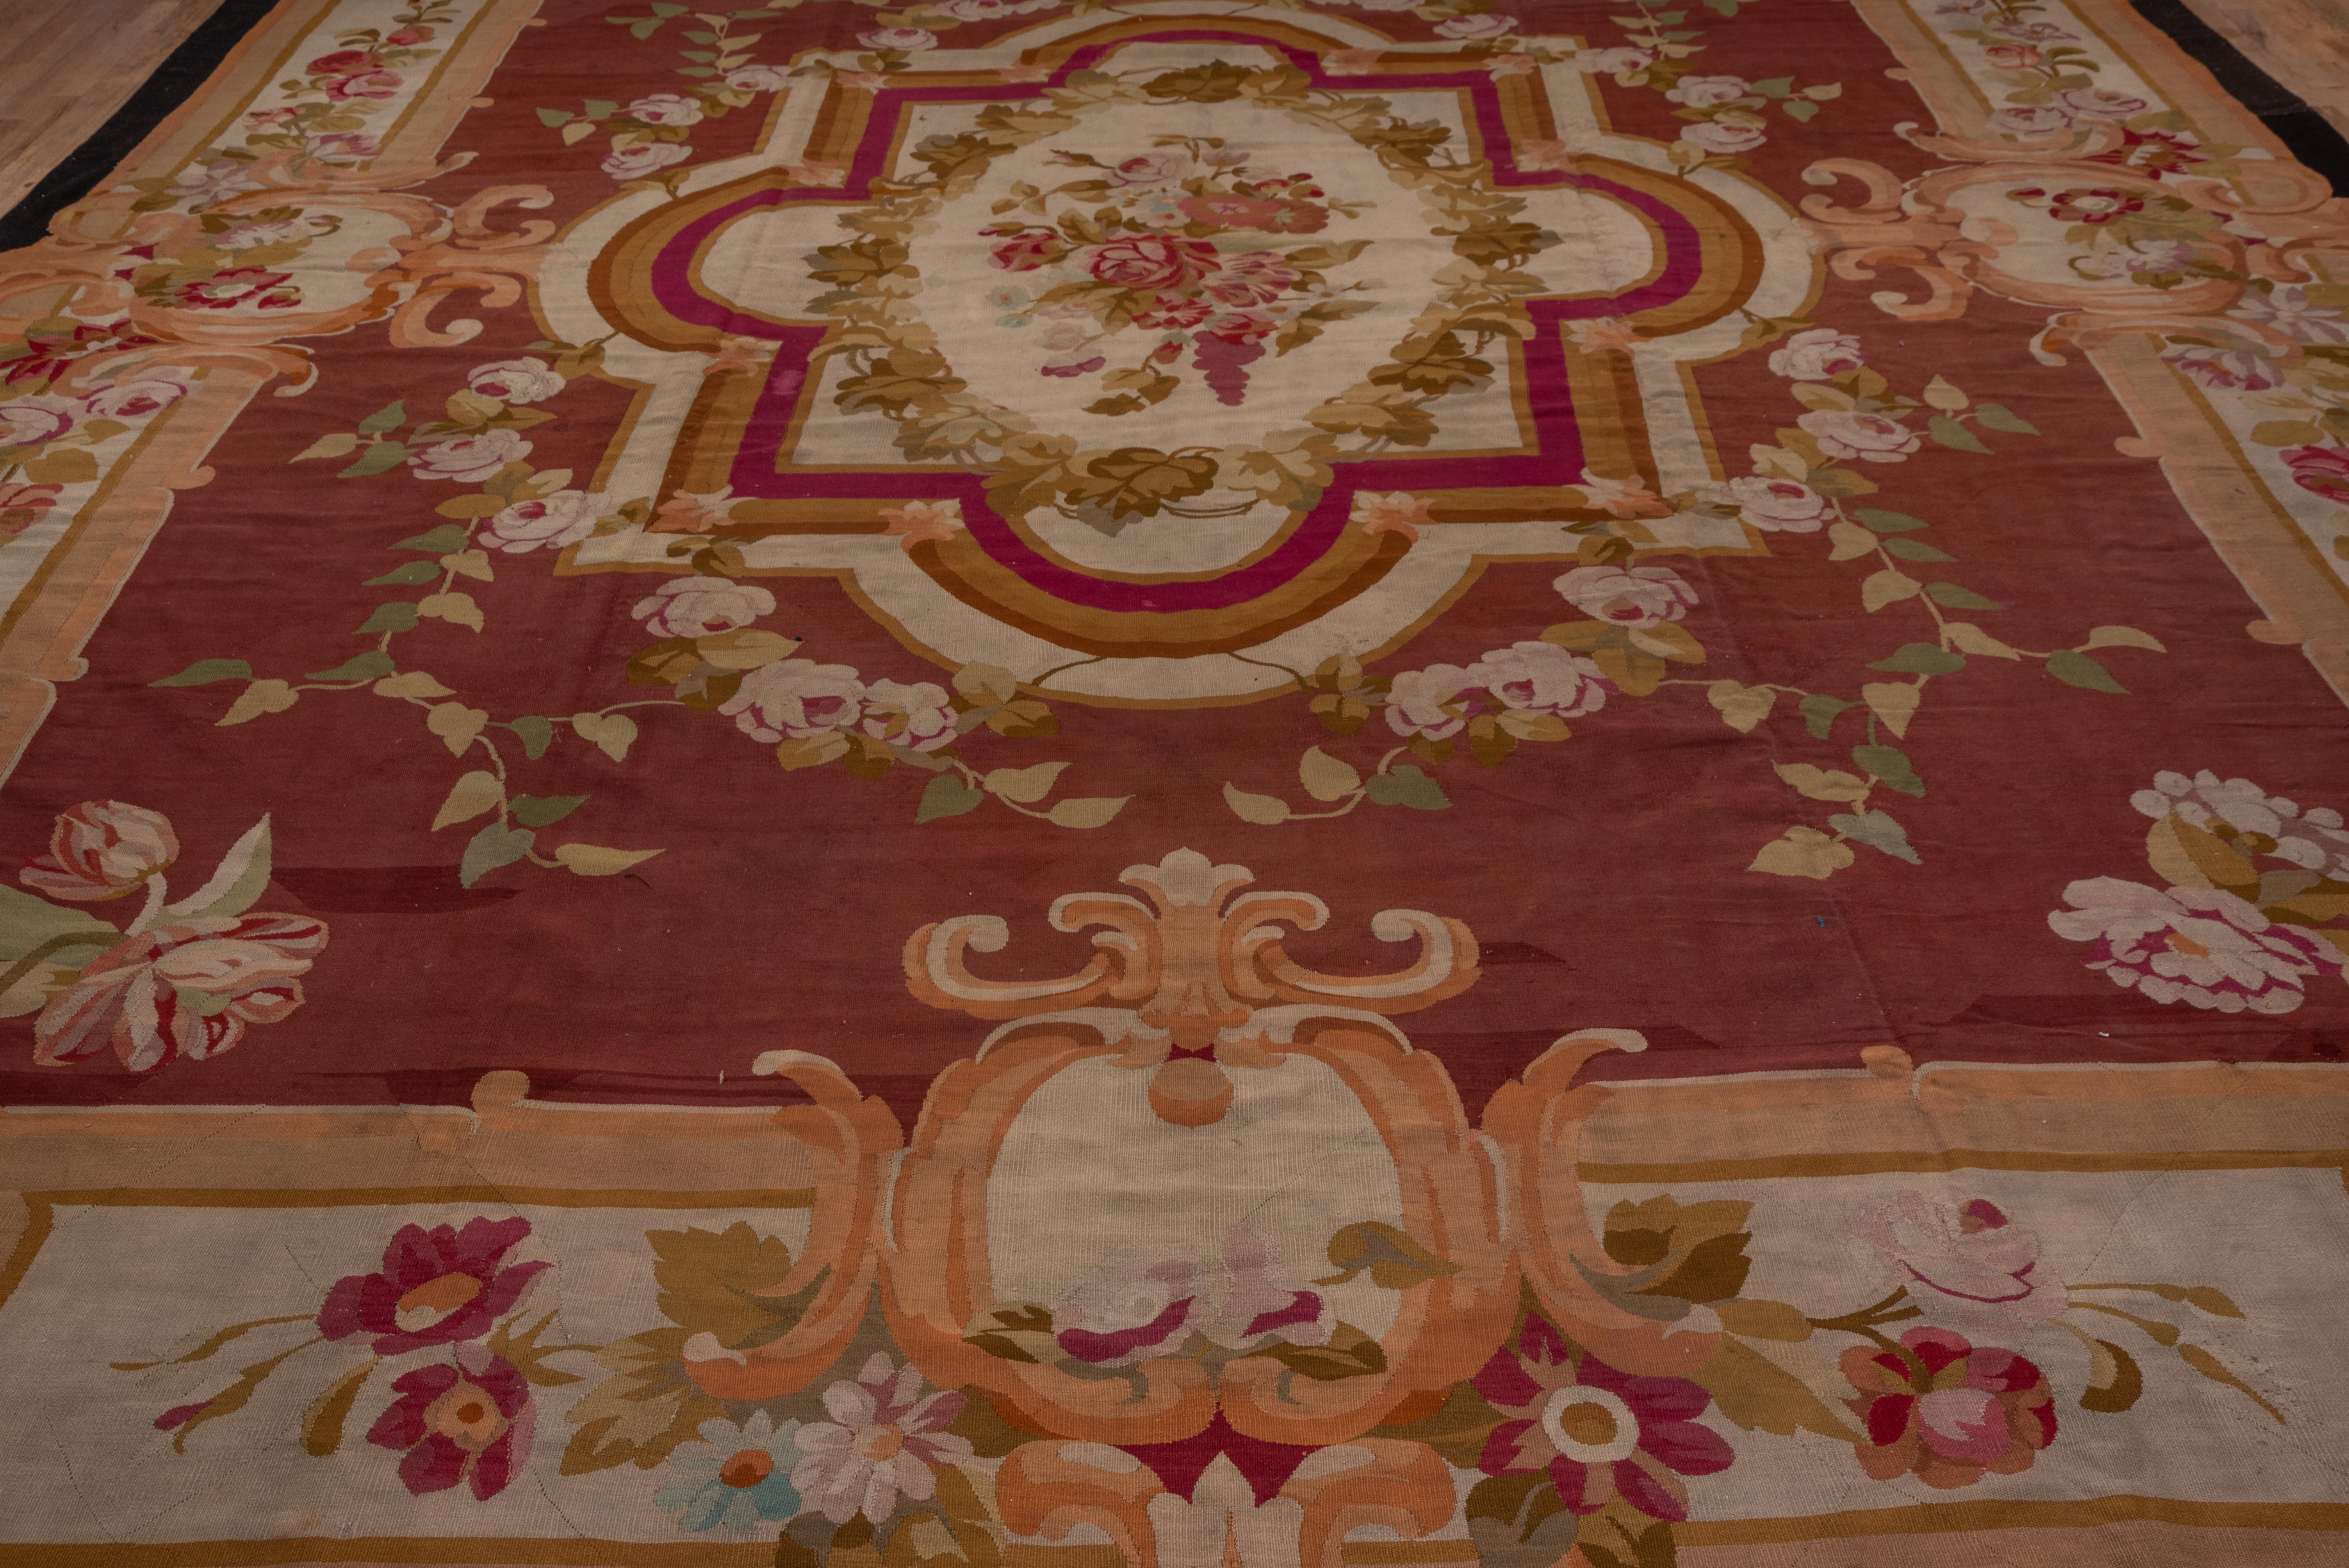 The rich red field displays a stepped and rounded octogramme medallion enclosing an ivory oval floral wreath and a central rose bouquet. Floral sprays are laid out symmetrically all around. The ivory border of this antique French tapestry-woven